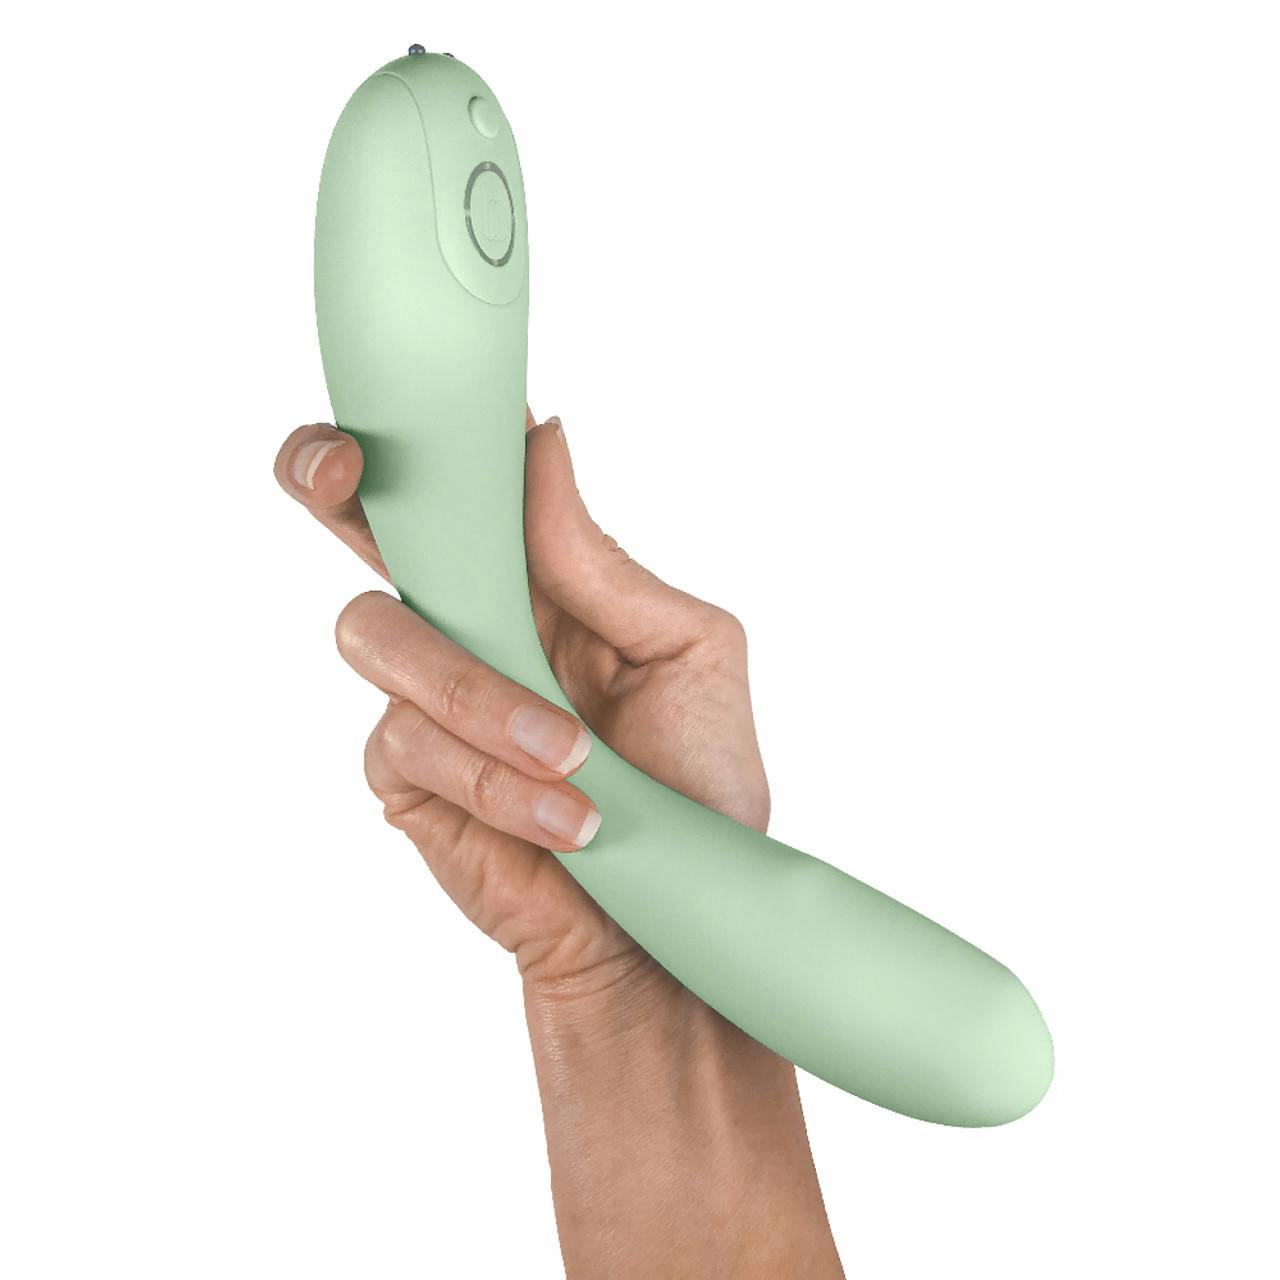 Hand holding Lora DiCarlo Curva g-spot and prostate massager